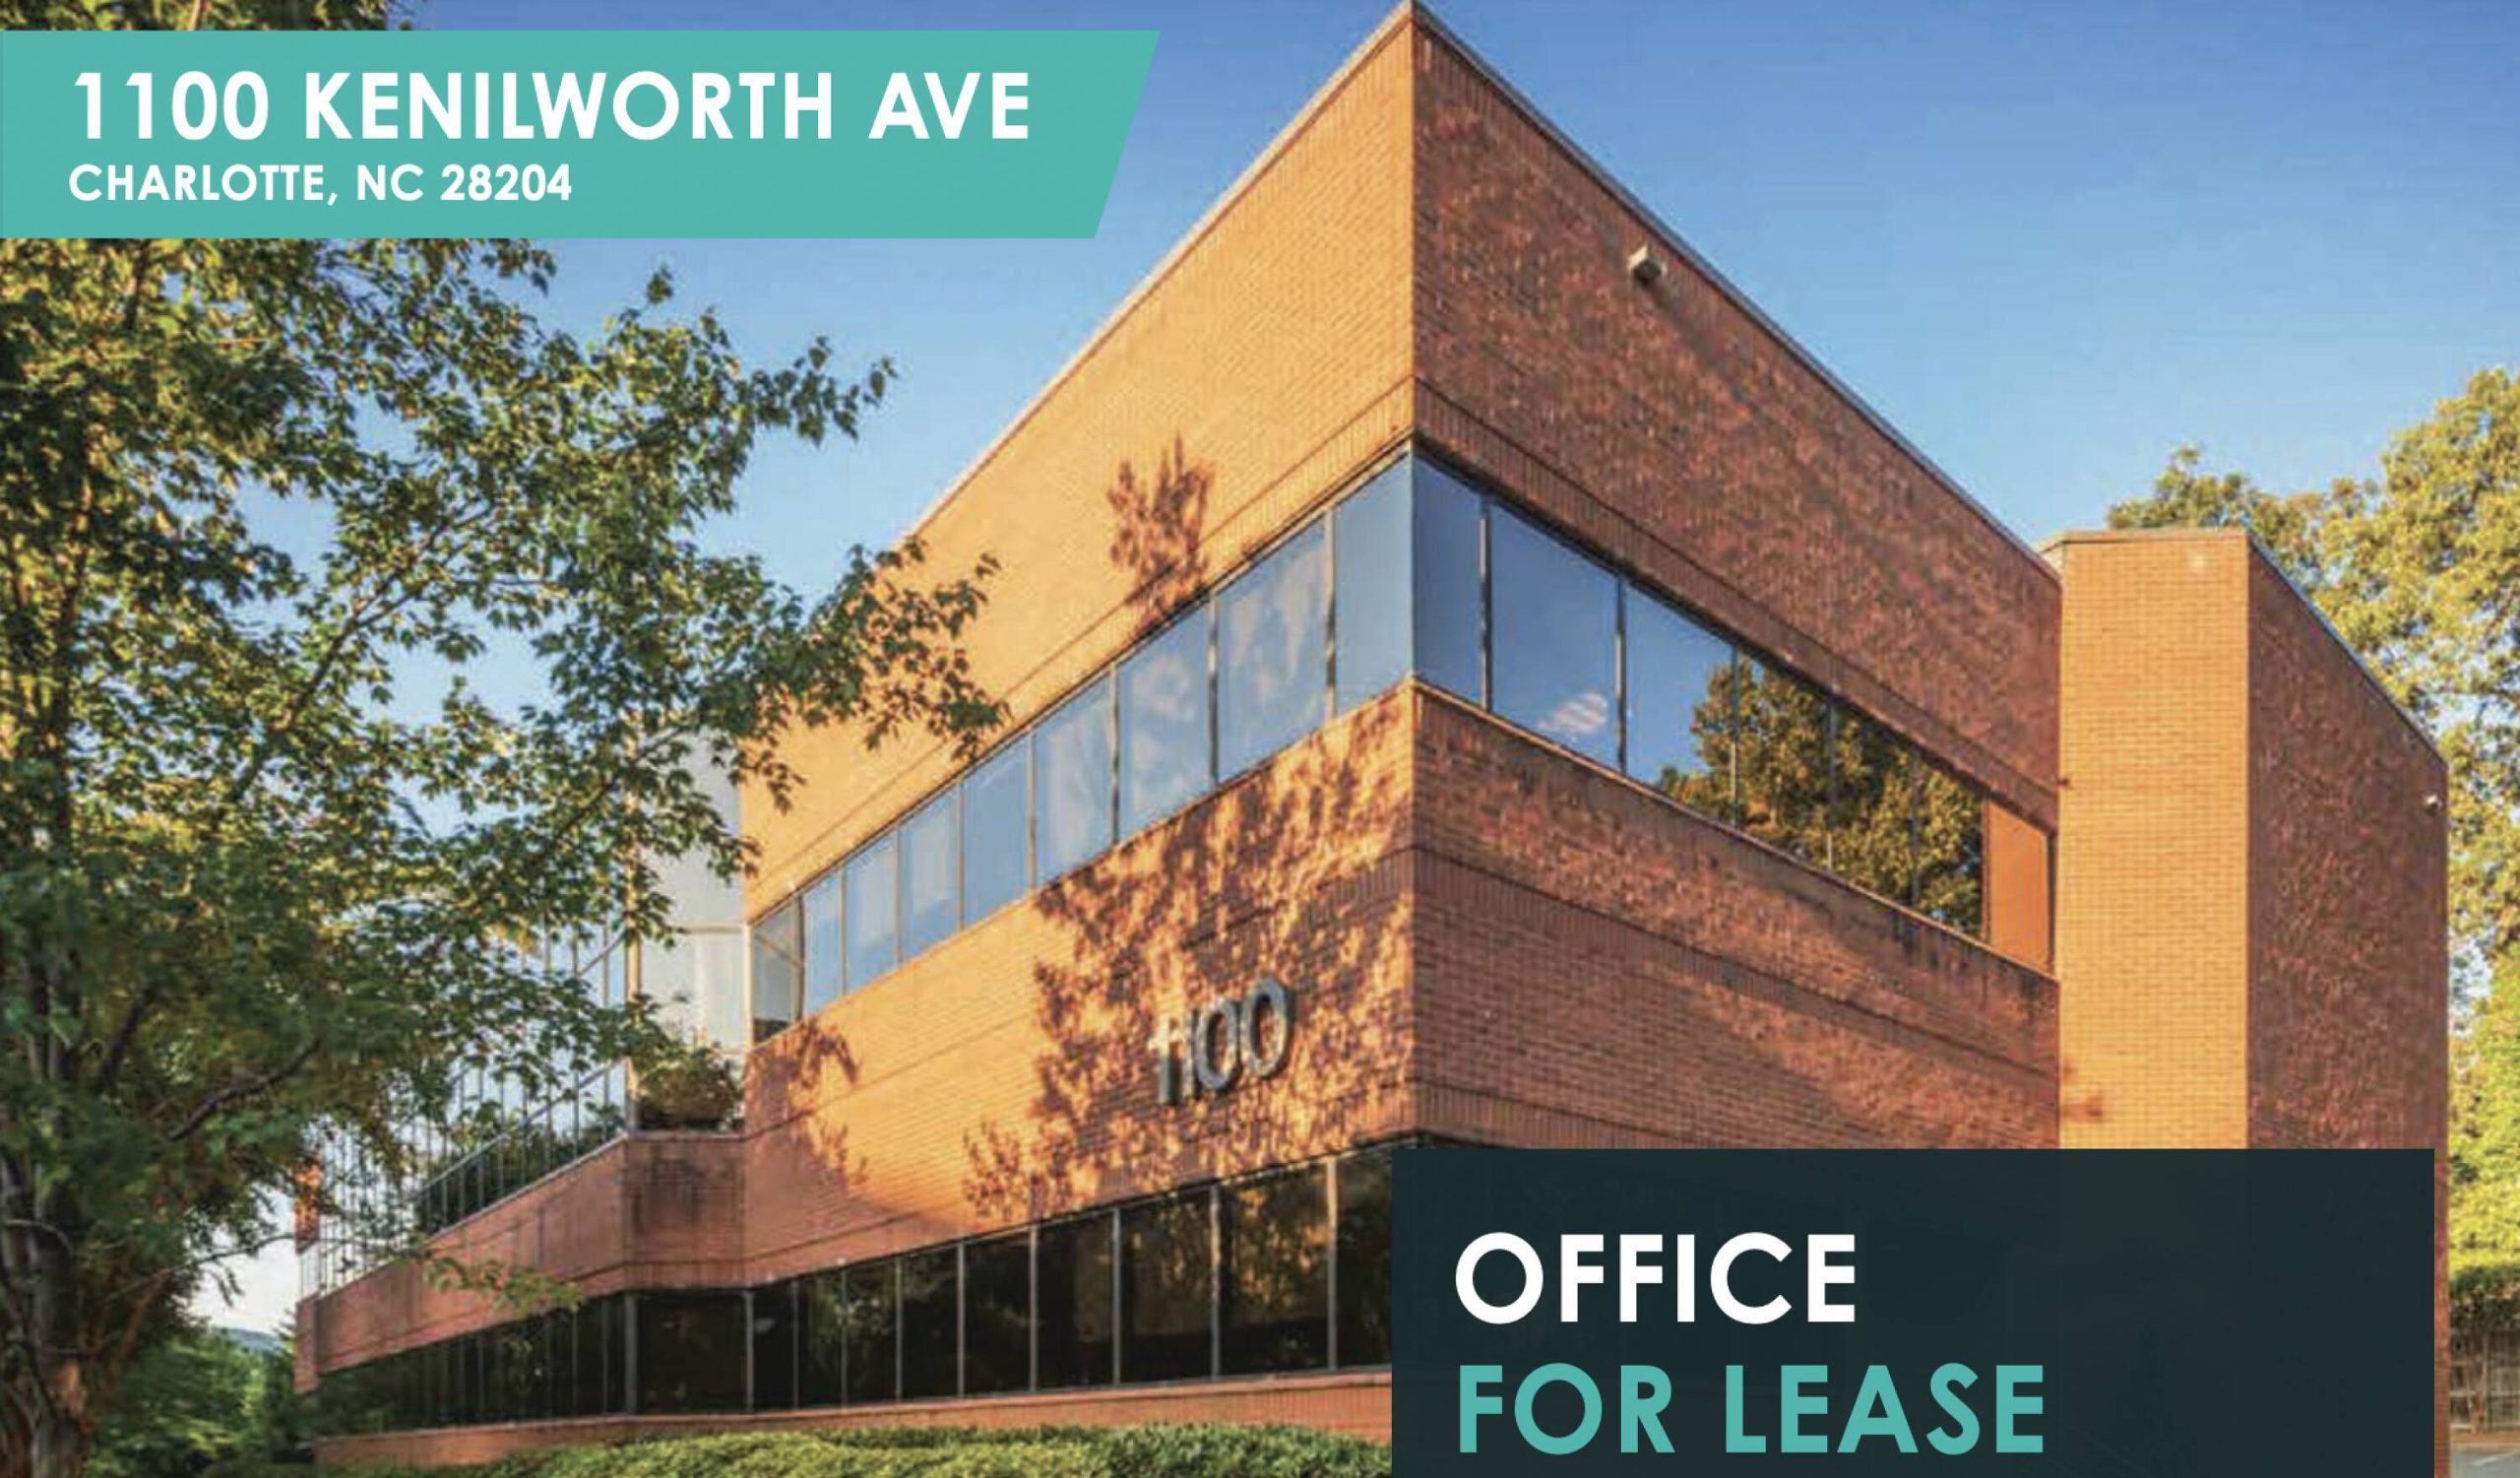 1100 Kenilworth Ave - Office For Lease